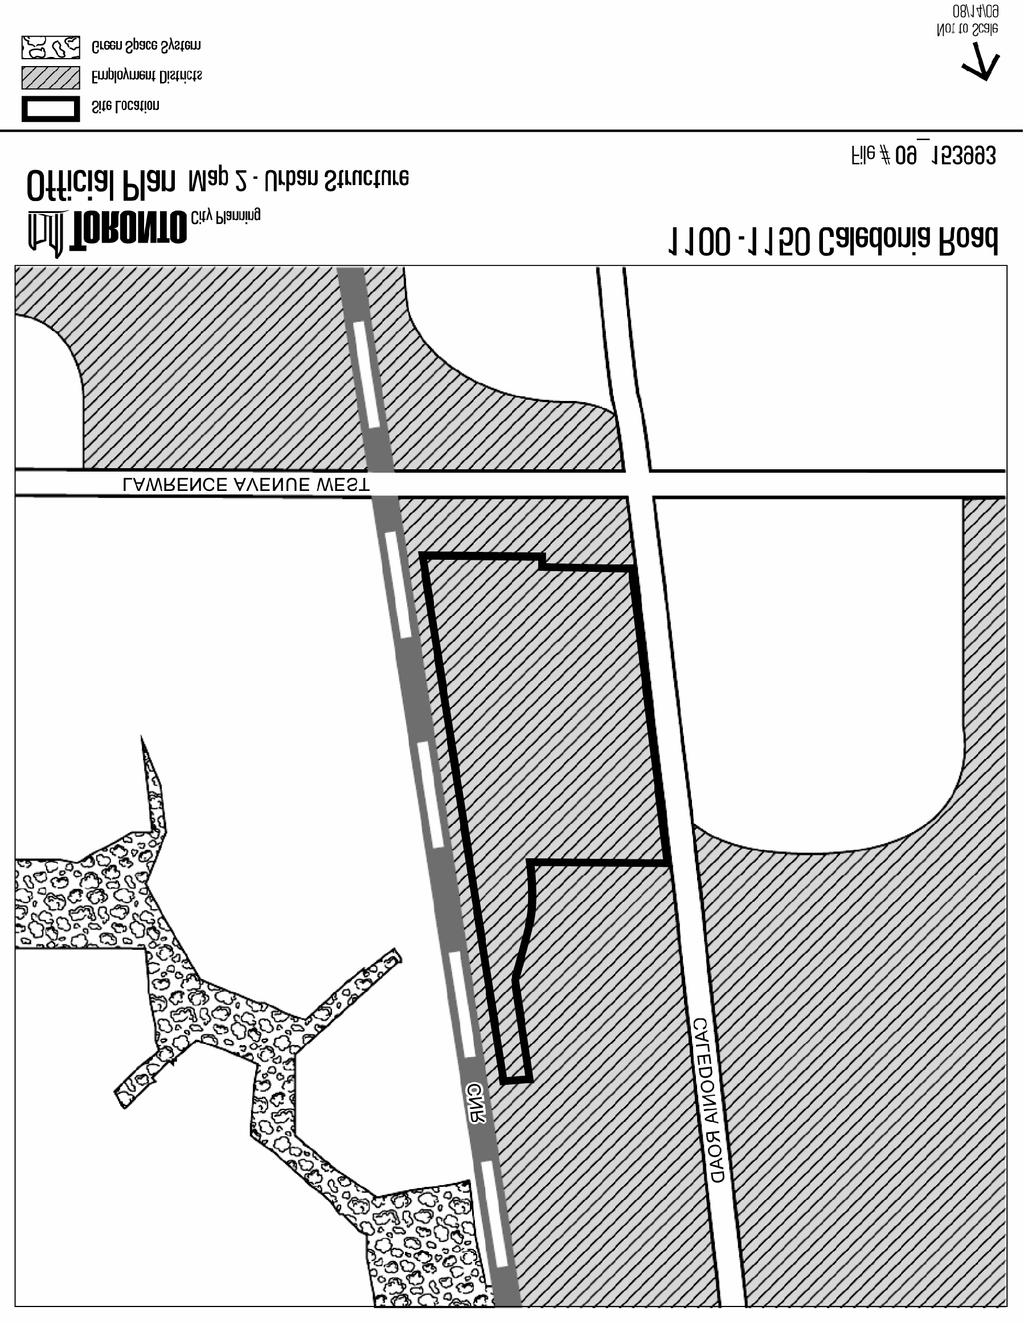 Attachment 3: Official Plan Map 2, Urban Structure Staff report for